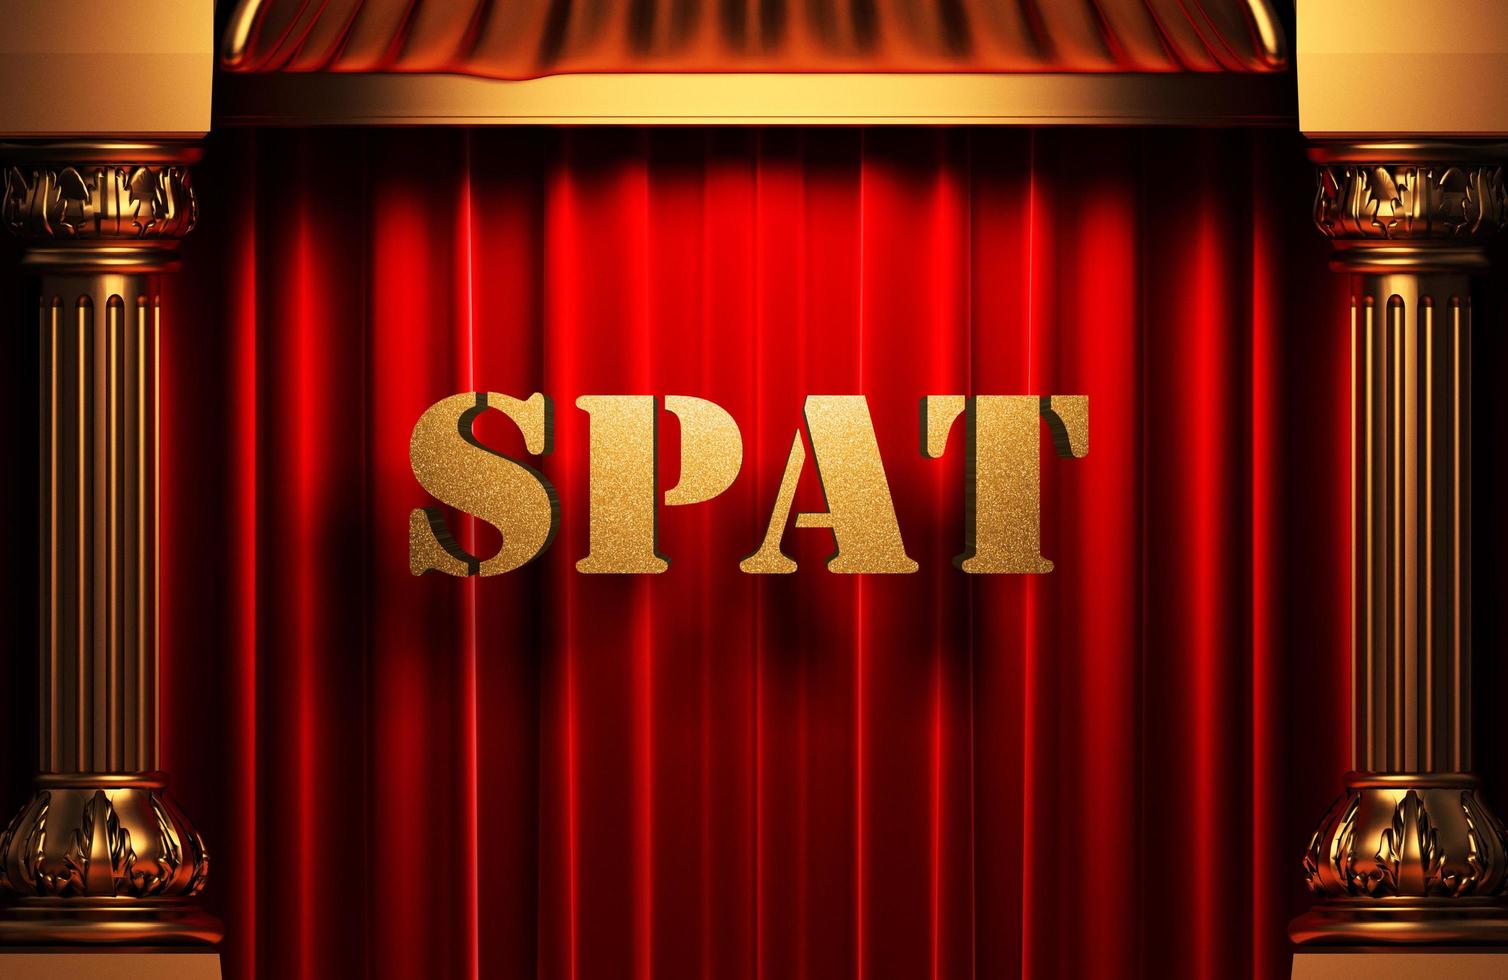 spat golden word on red curtain photo